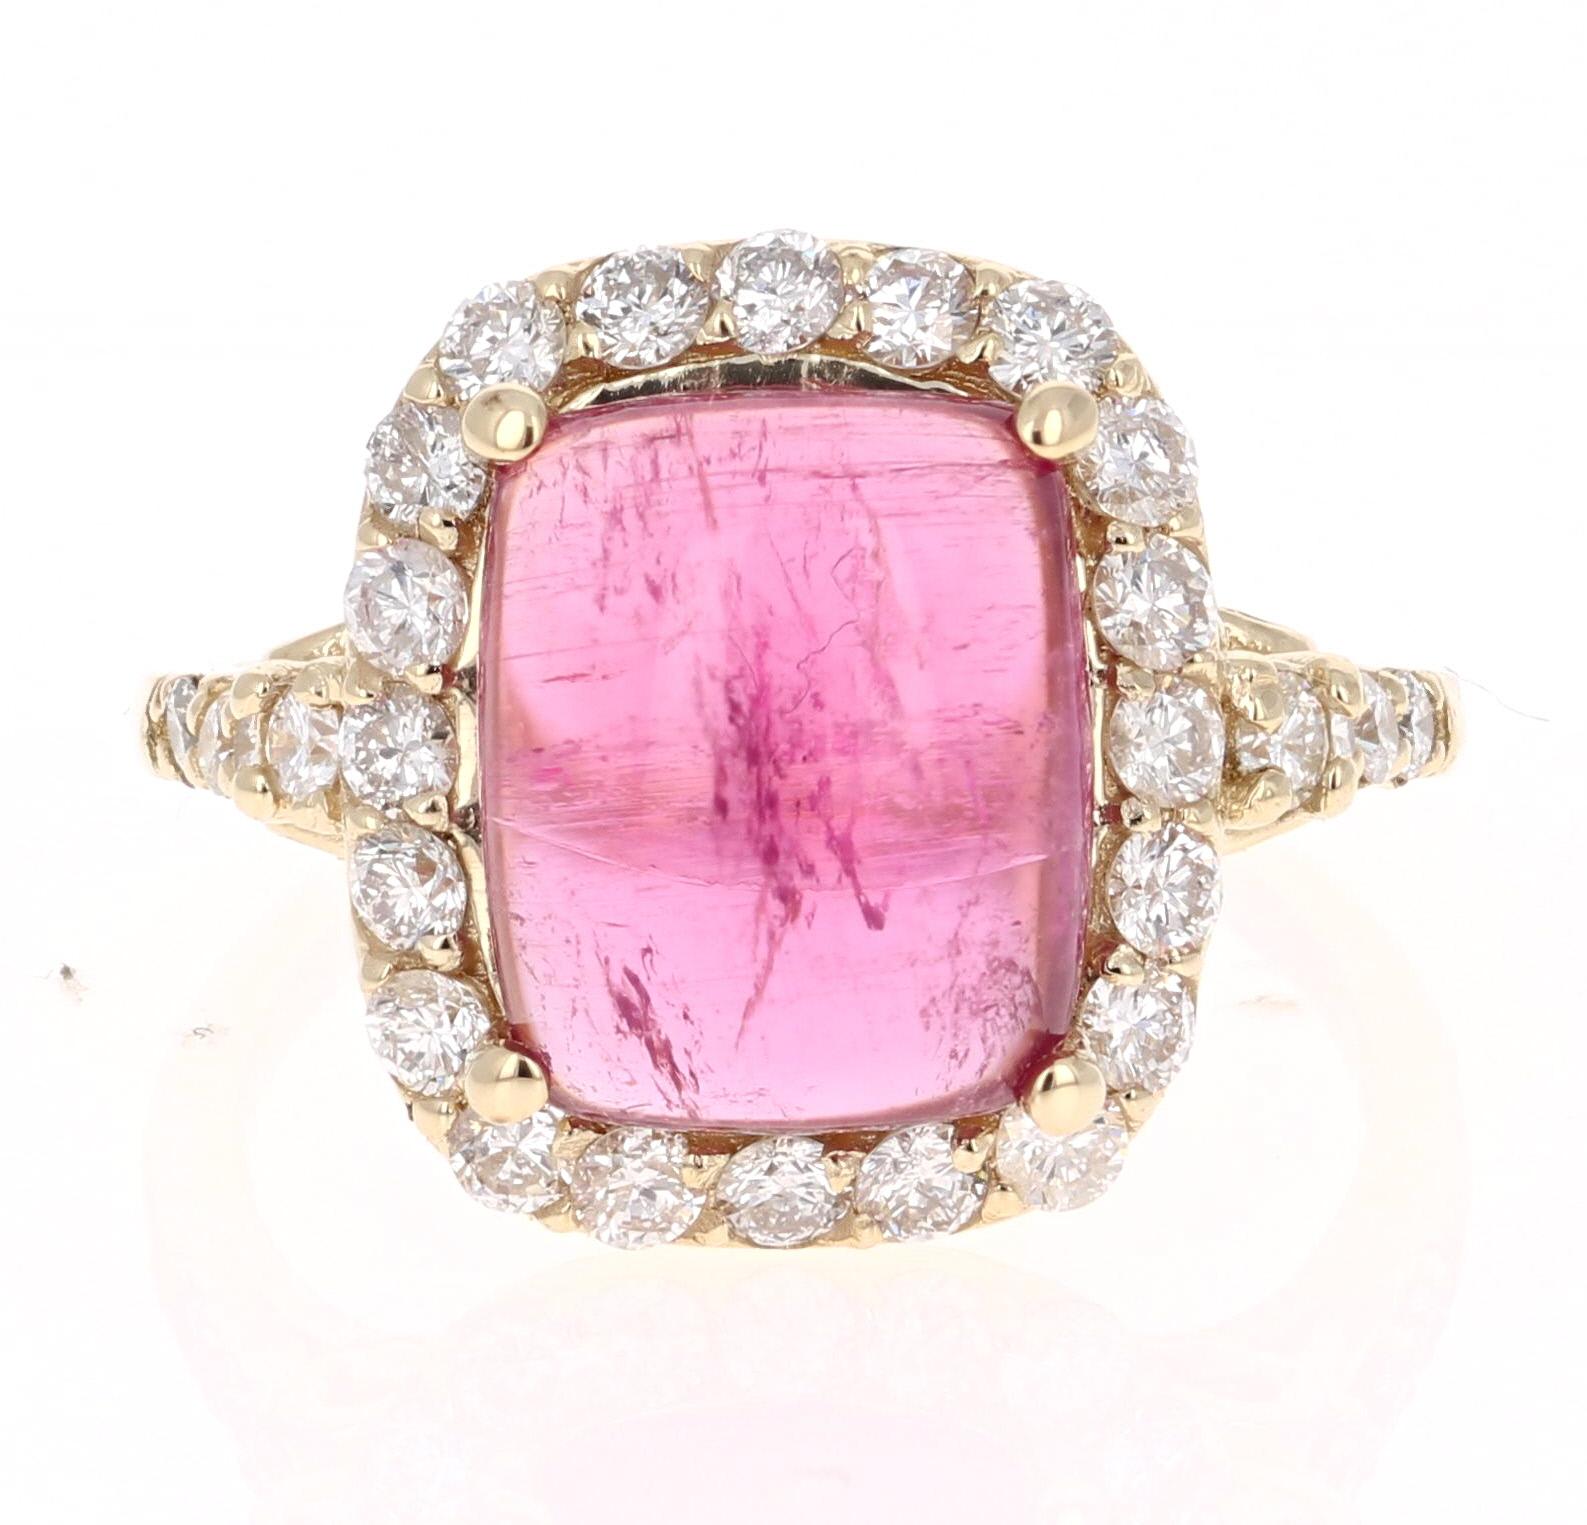 Stunning and uniquely designed 6.86 Carat Pink Tourmaline and  Diamond Yellow Gold Cocktail Ring! 

This ring has a 4.40 carat Cabochon Cut Pink Tourmaline that is set in the center of the ring and is surrounded by 28 Round Cut Diamonds that weigh